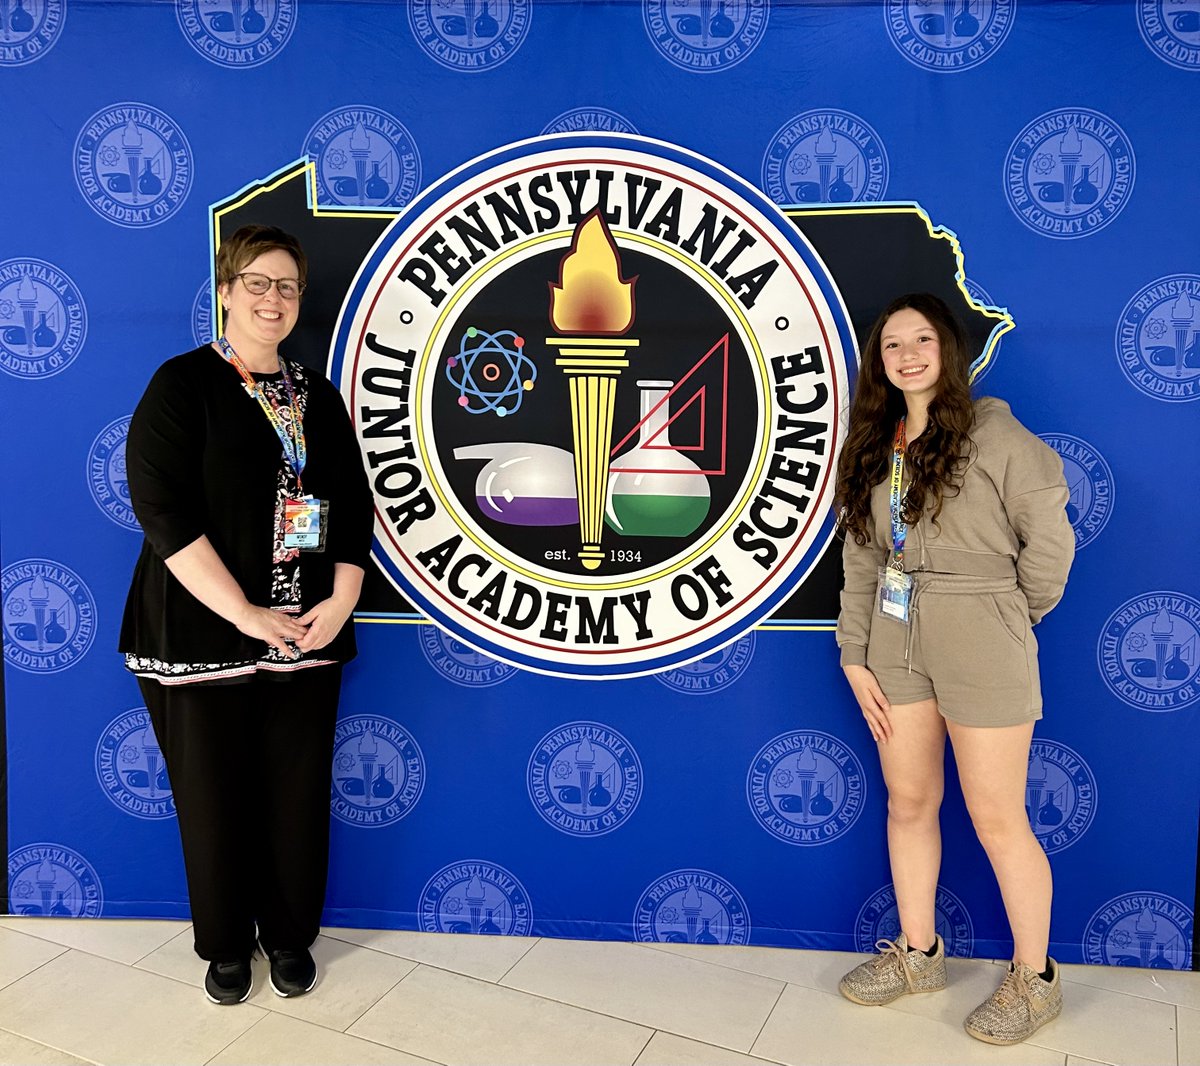 Congrats to @TJHSJaguars' Sarah Greenblatt on her first place award at Pa. Junior Academy of Sciences state competition! Sarah topped nearly 100 behavioral science research projects presented. Mrs. Matta, her sponsor, accompanied Sarah to @penn_state for the competition. #WJHSD